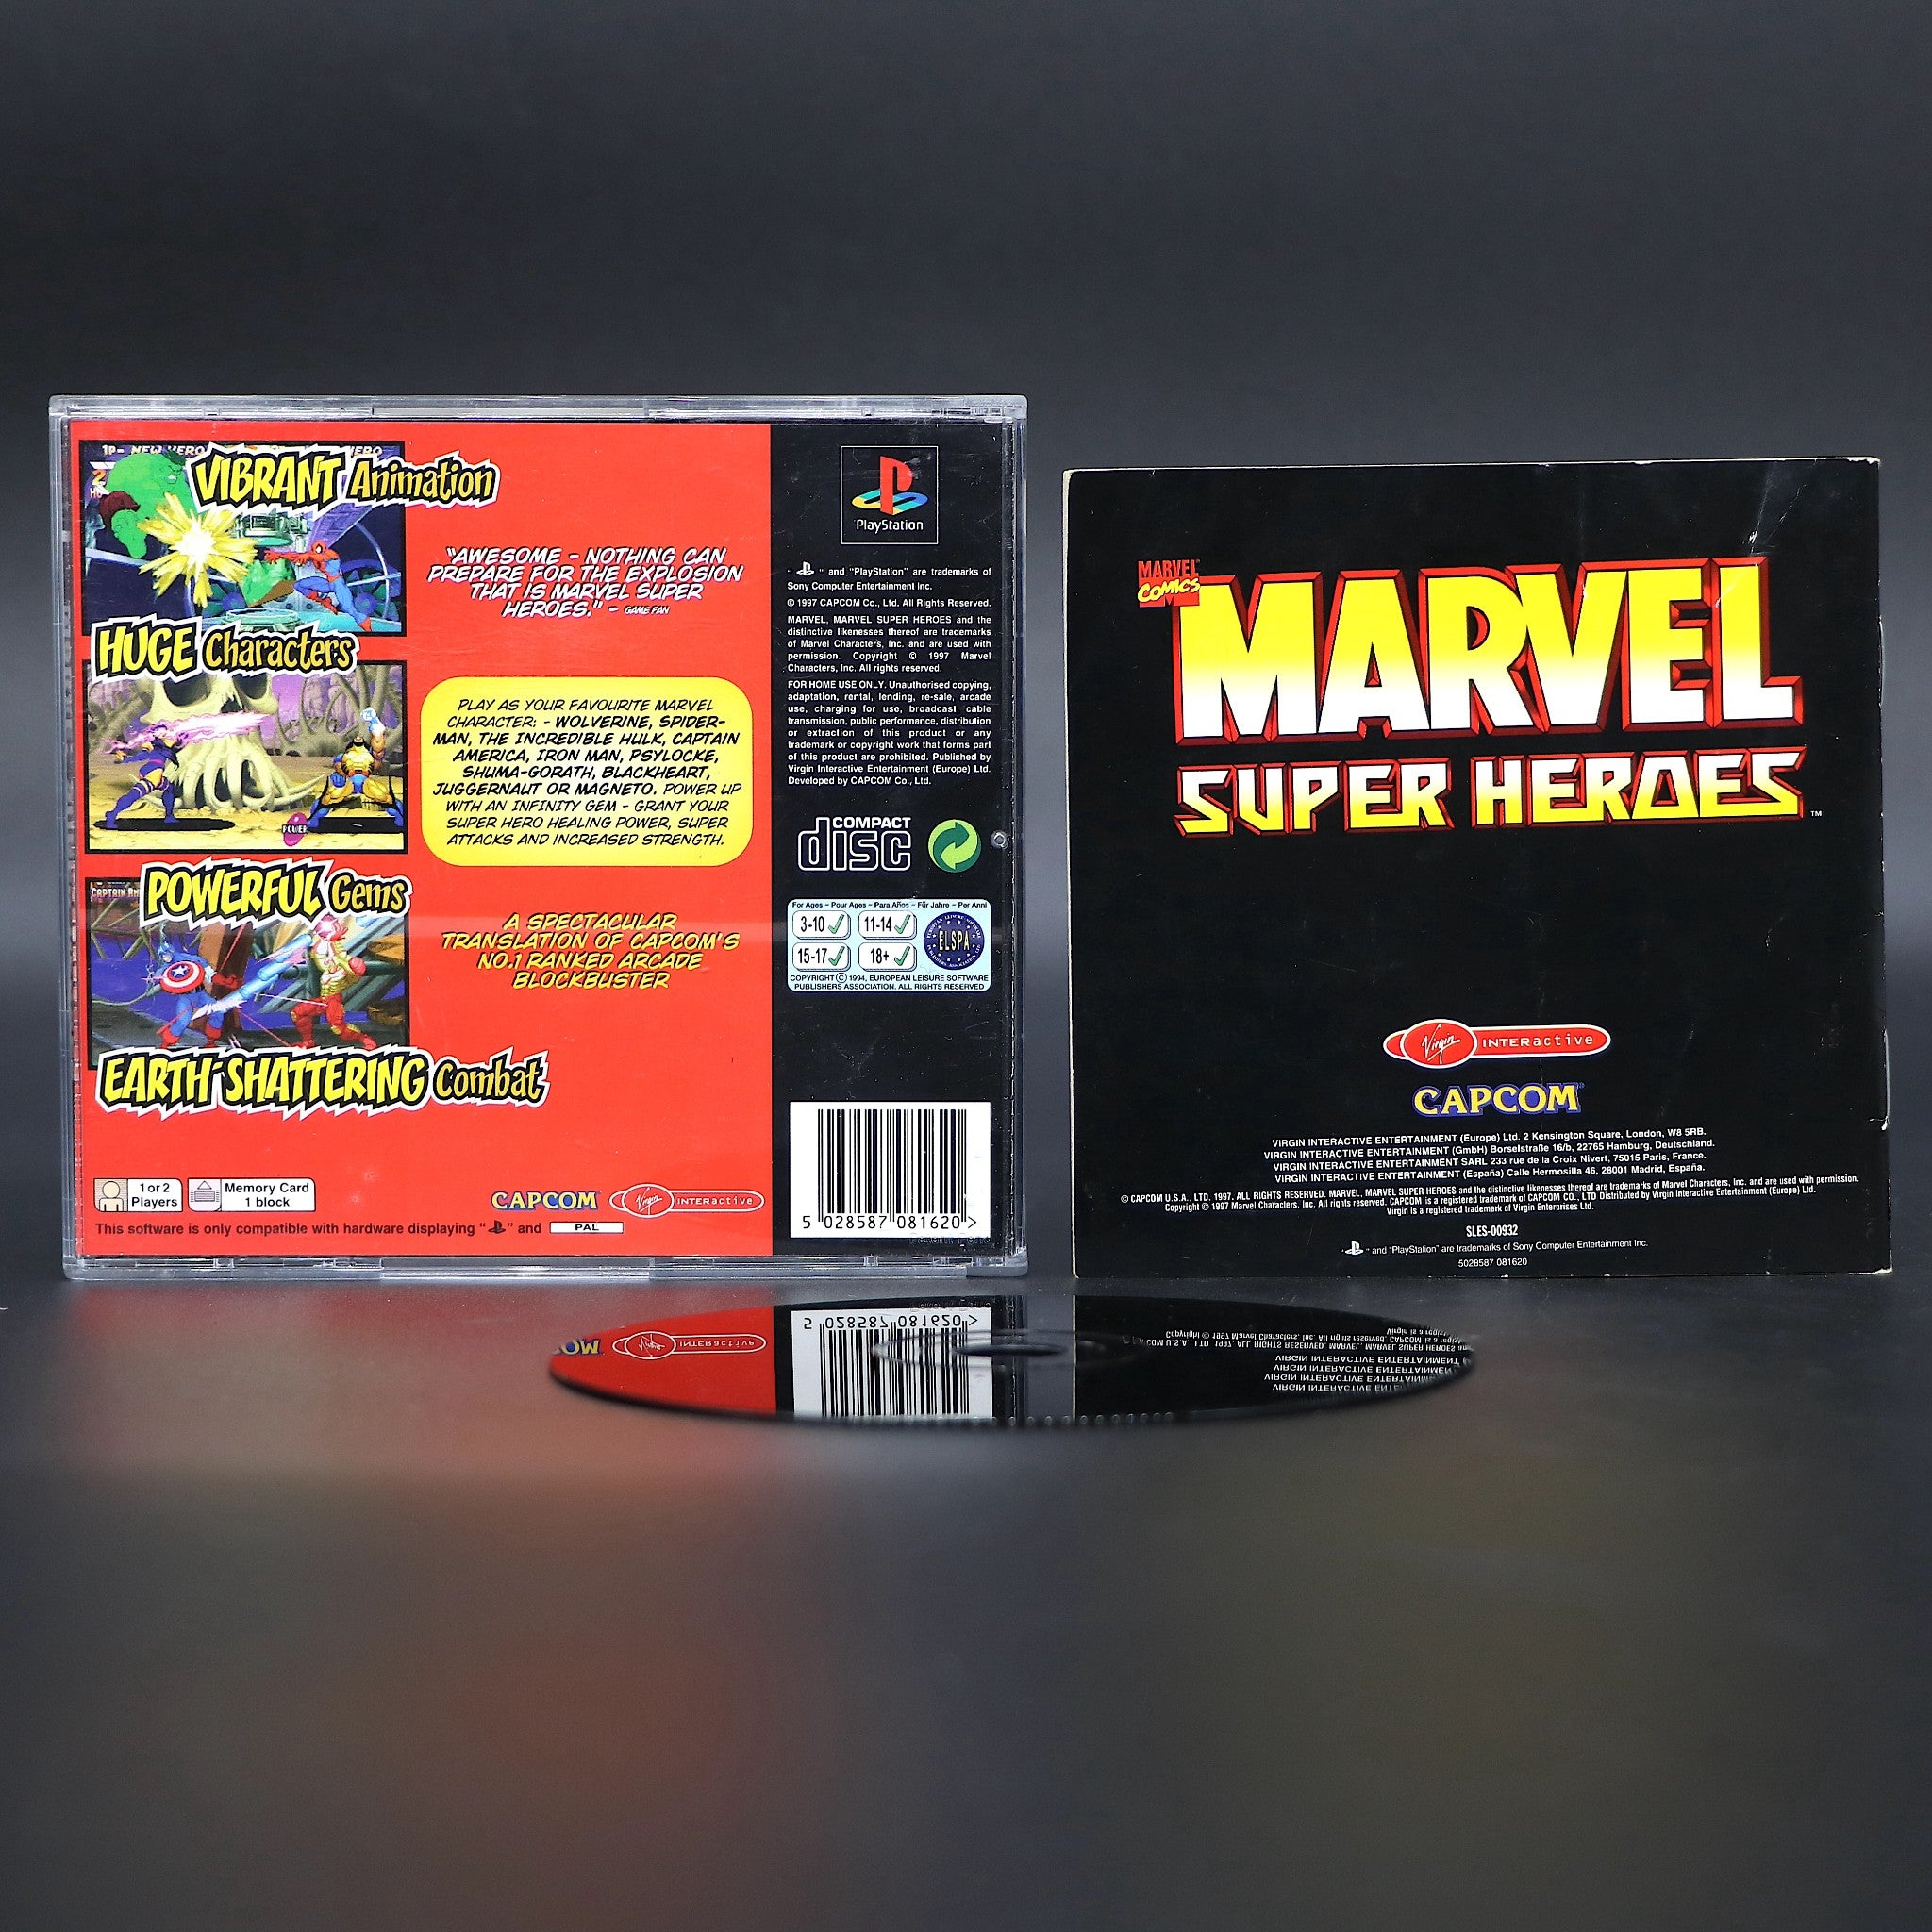 Marvel Super Heroes | Sony PS1 Playstation PSOne Game | VGC